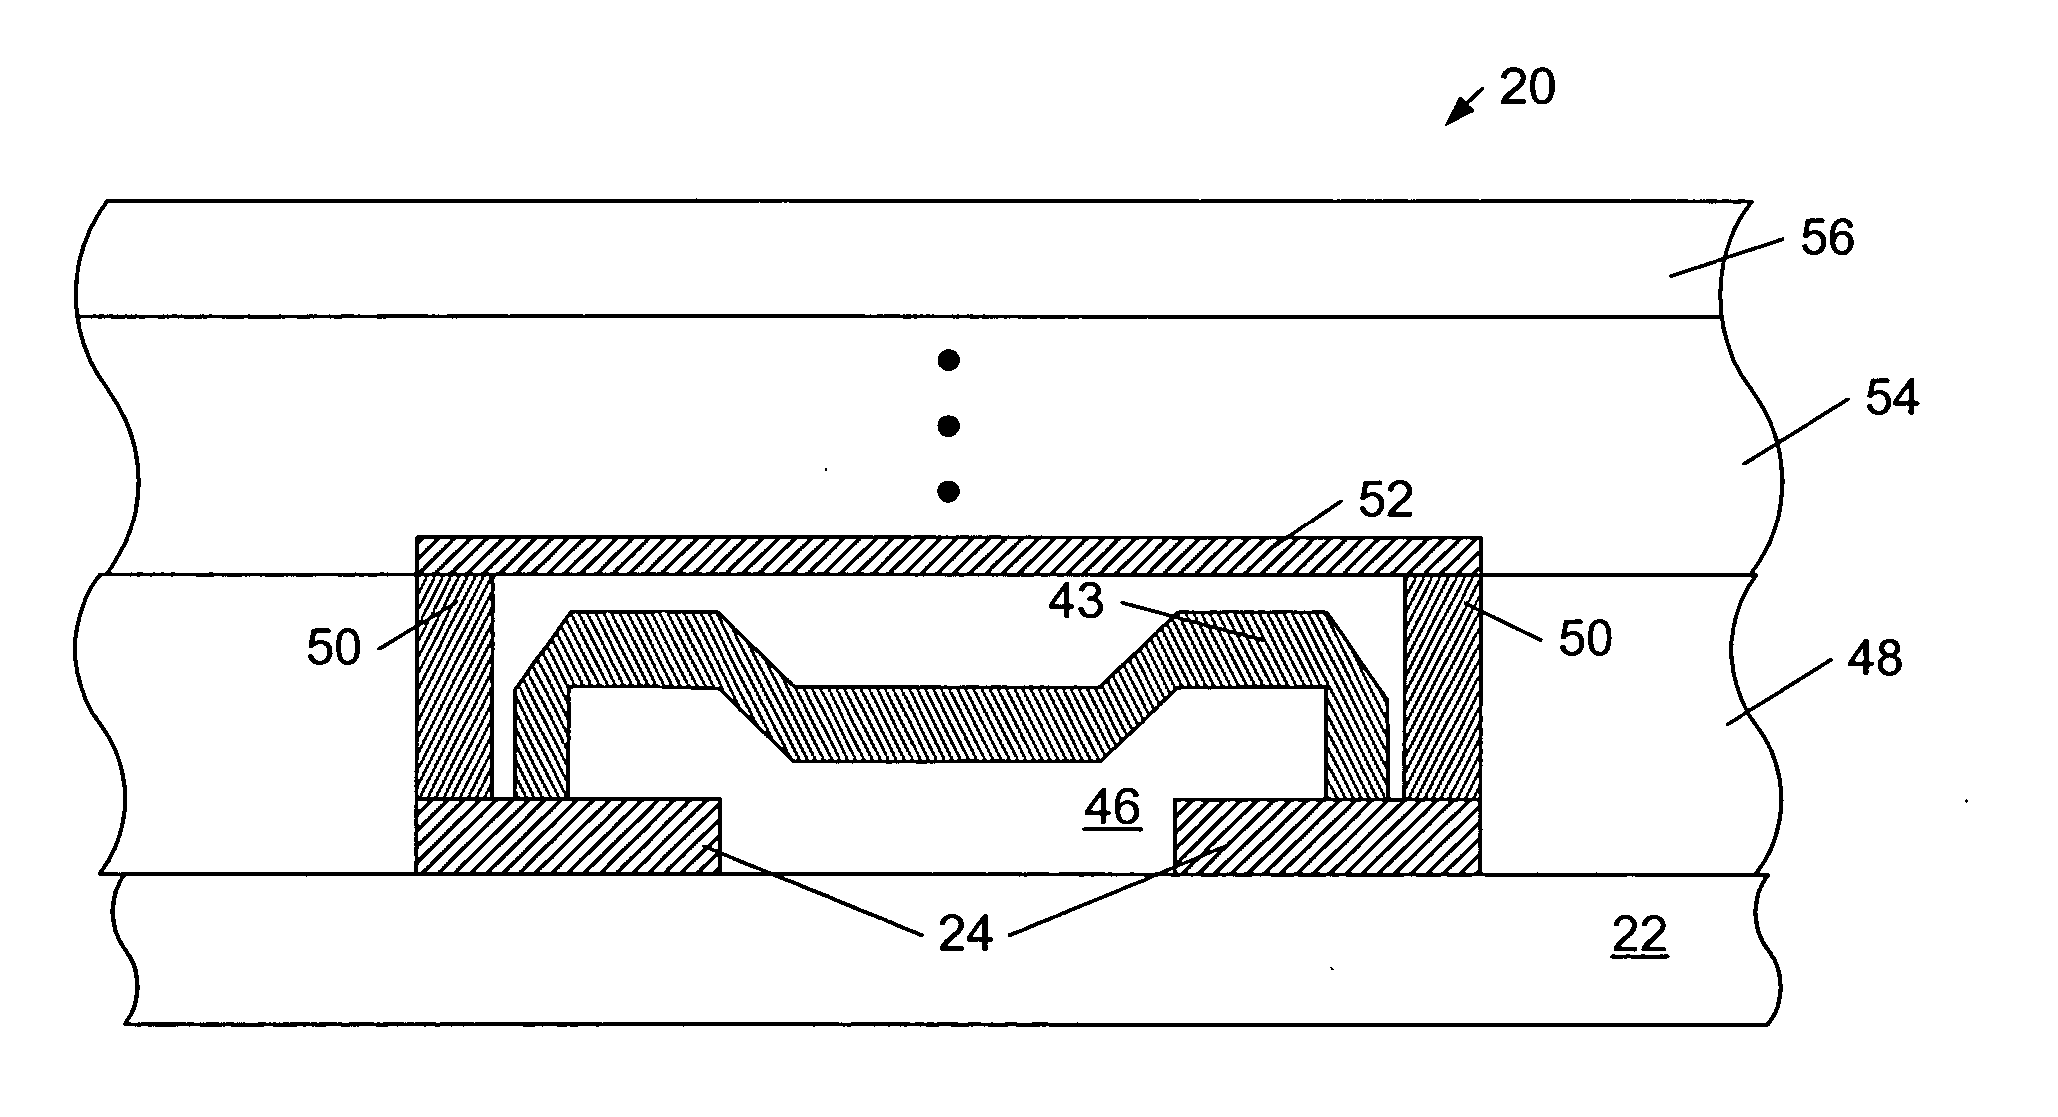 Integrated circuit having one or more conductive devices formed over a SAW and/or MEMS device